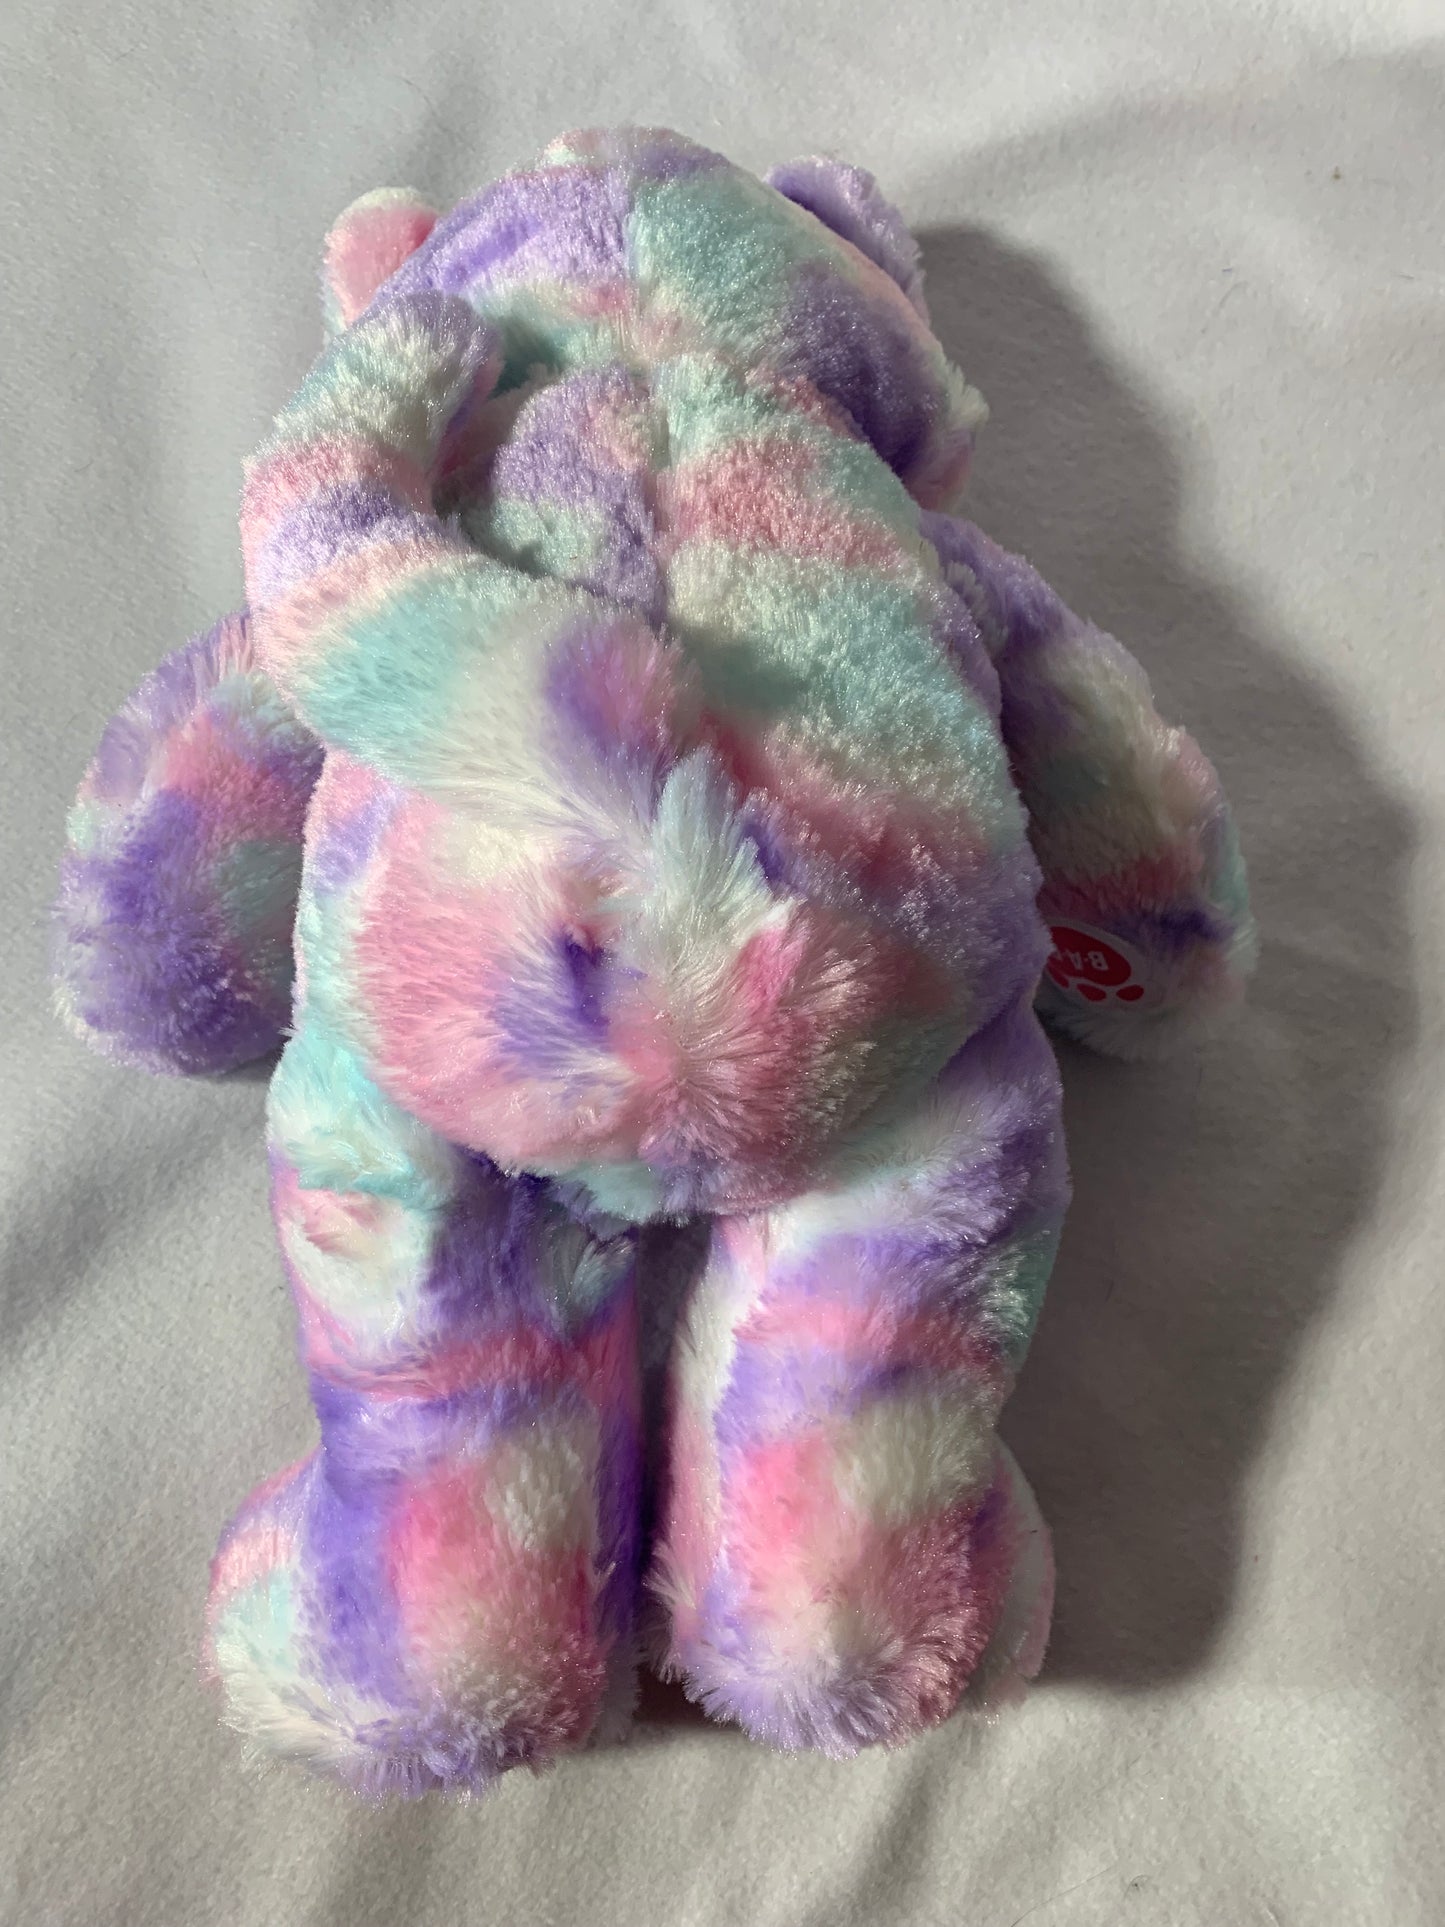 Weighted stuffed animal, Large plush cat with 4 lbs, rainbow, grey, beige kitten, washable buddy, orange stripe, Aunt Sandy's Sewing, autism sensory toy